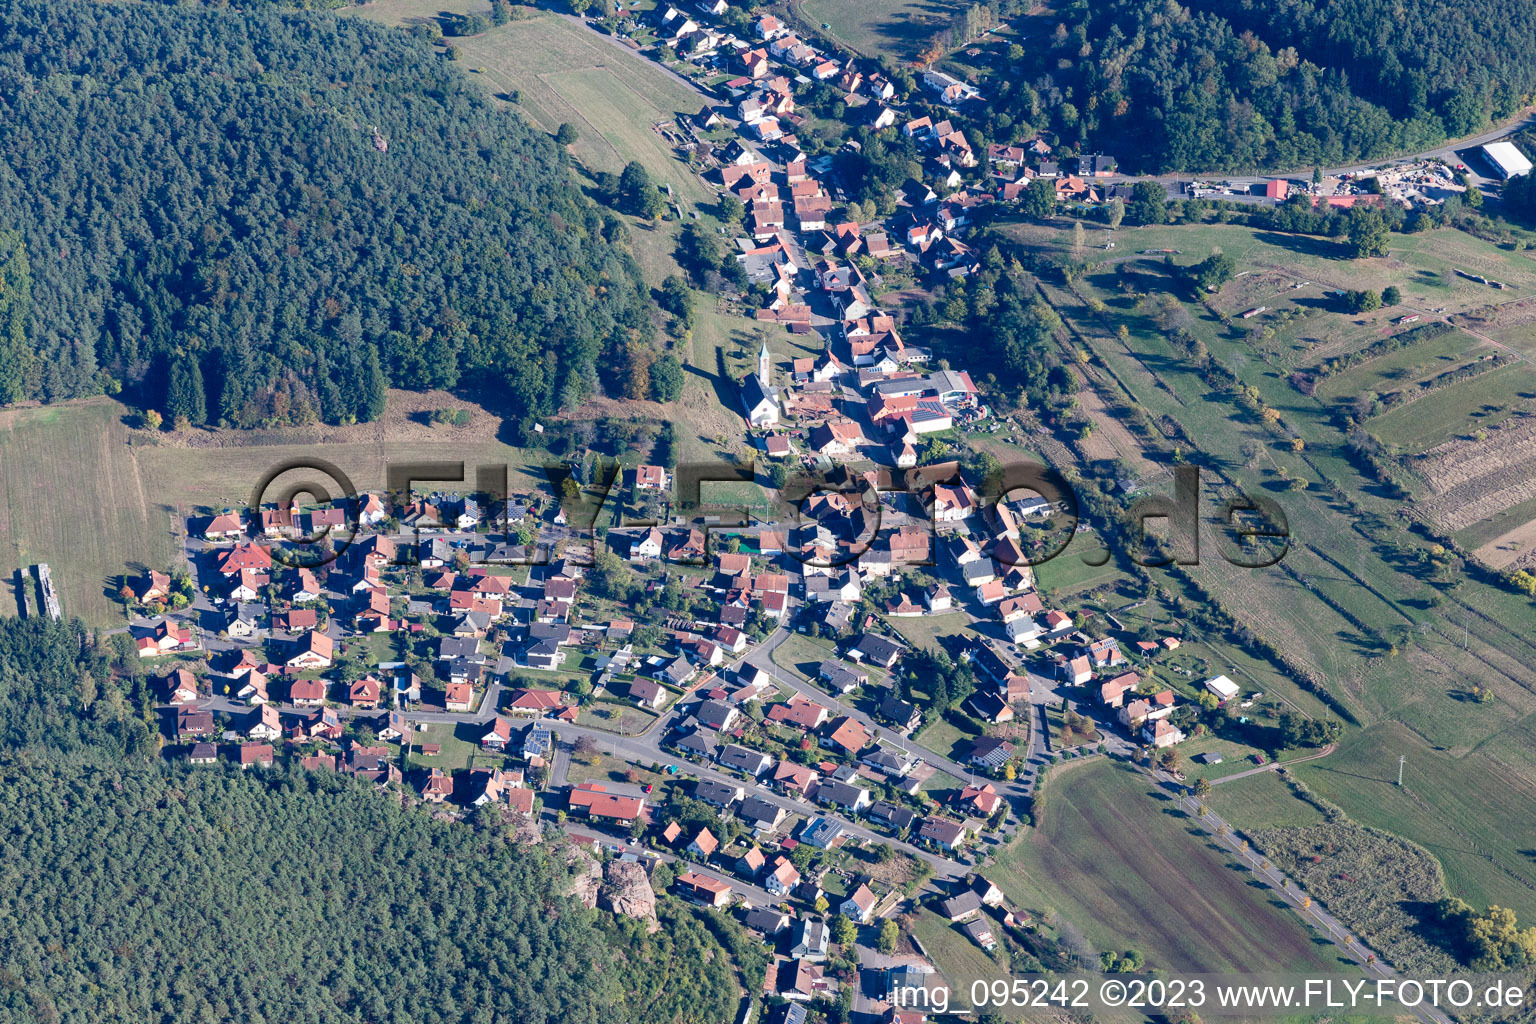 Dahn in the state Rhineland-Palatinate, Germany seen from a drone